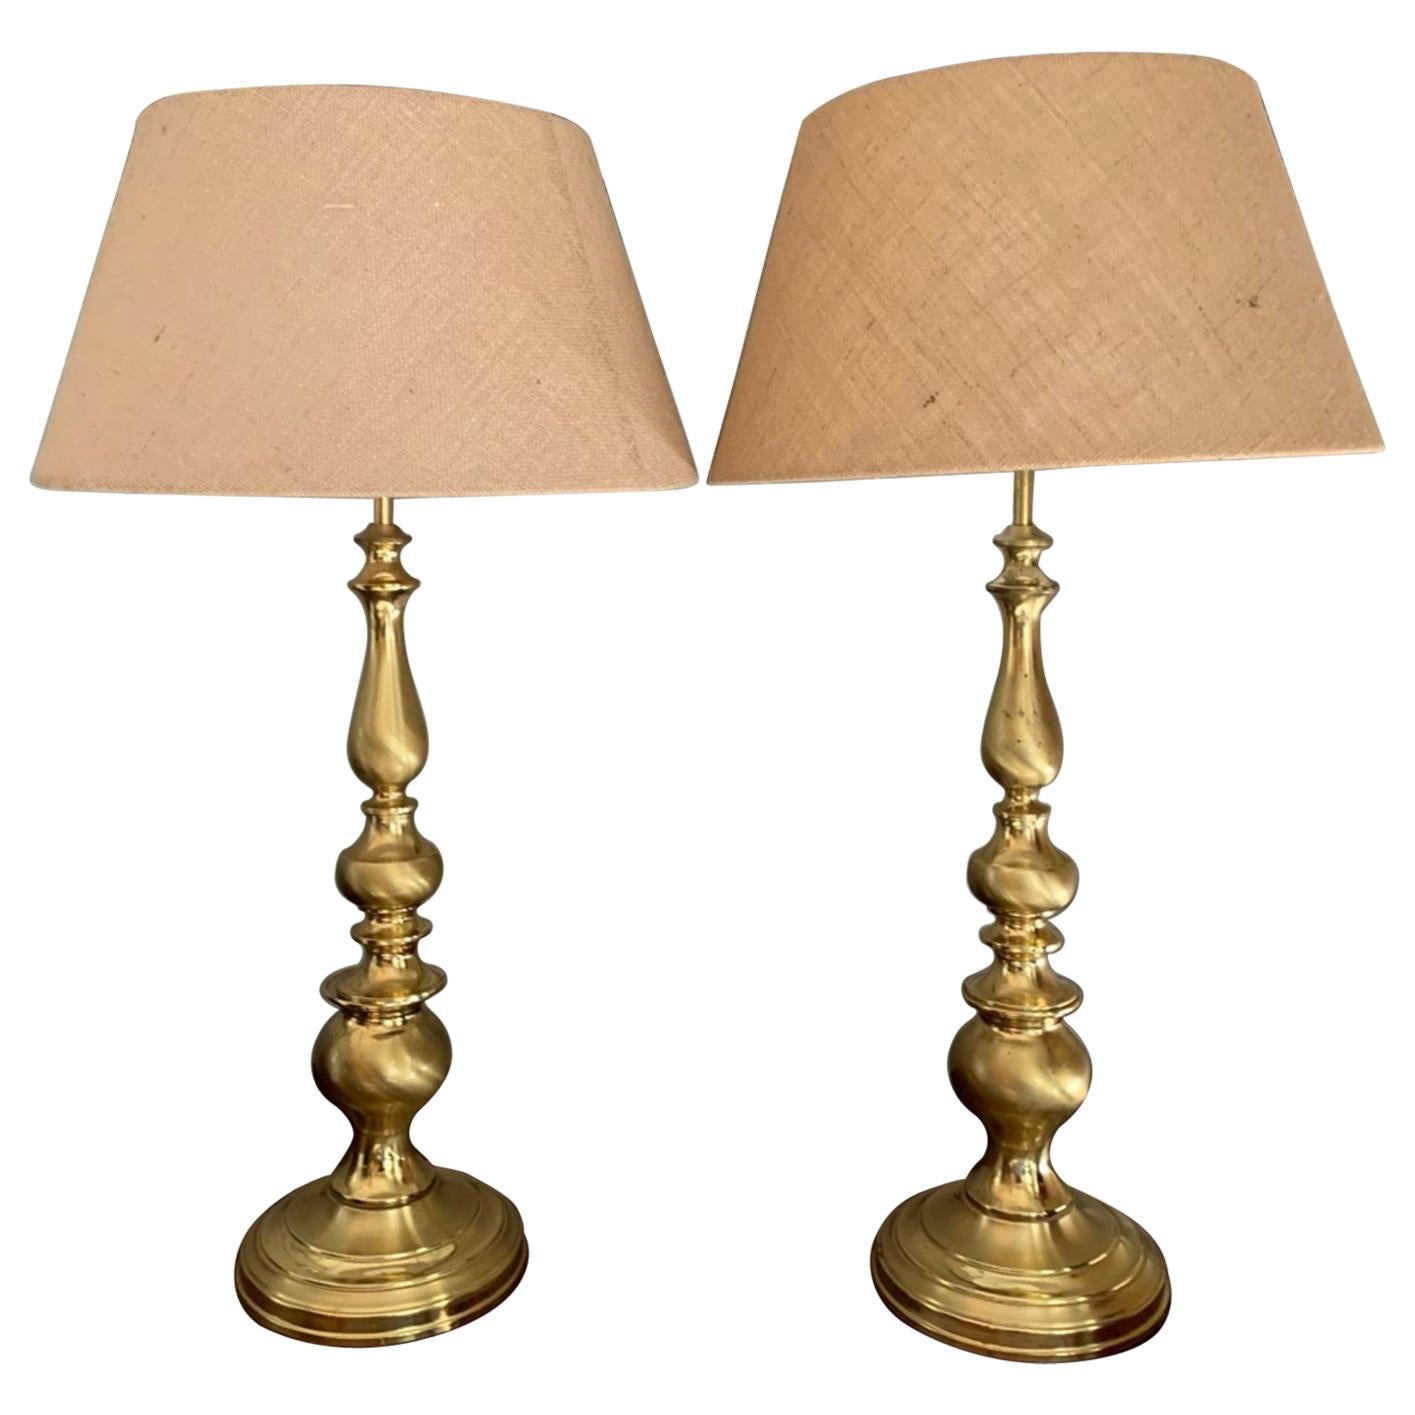 Pair of Large Vintage Midcentury Brass Table Lamps